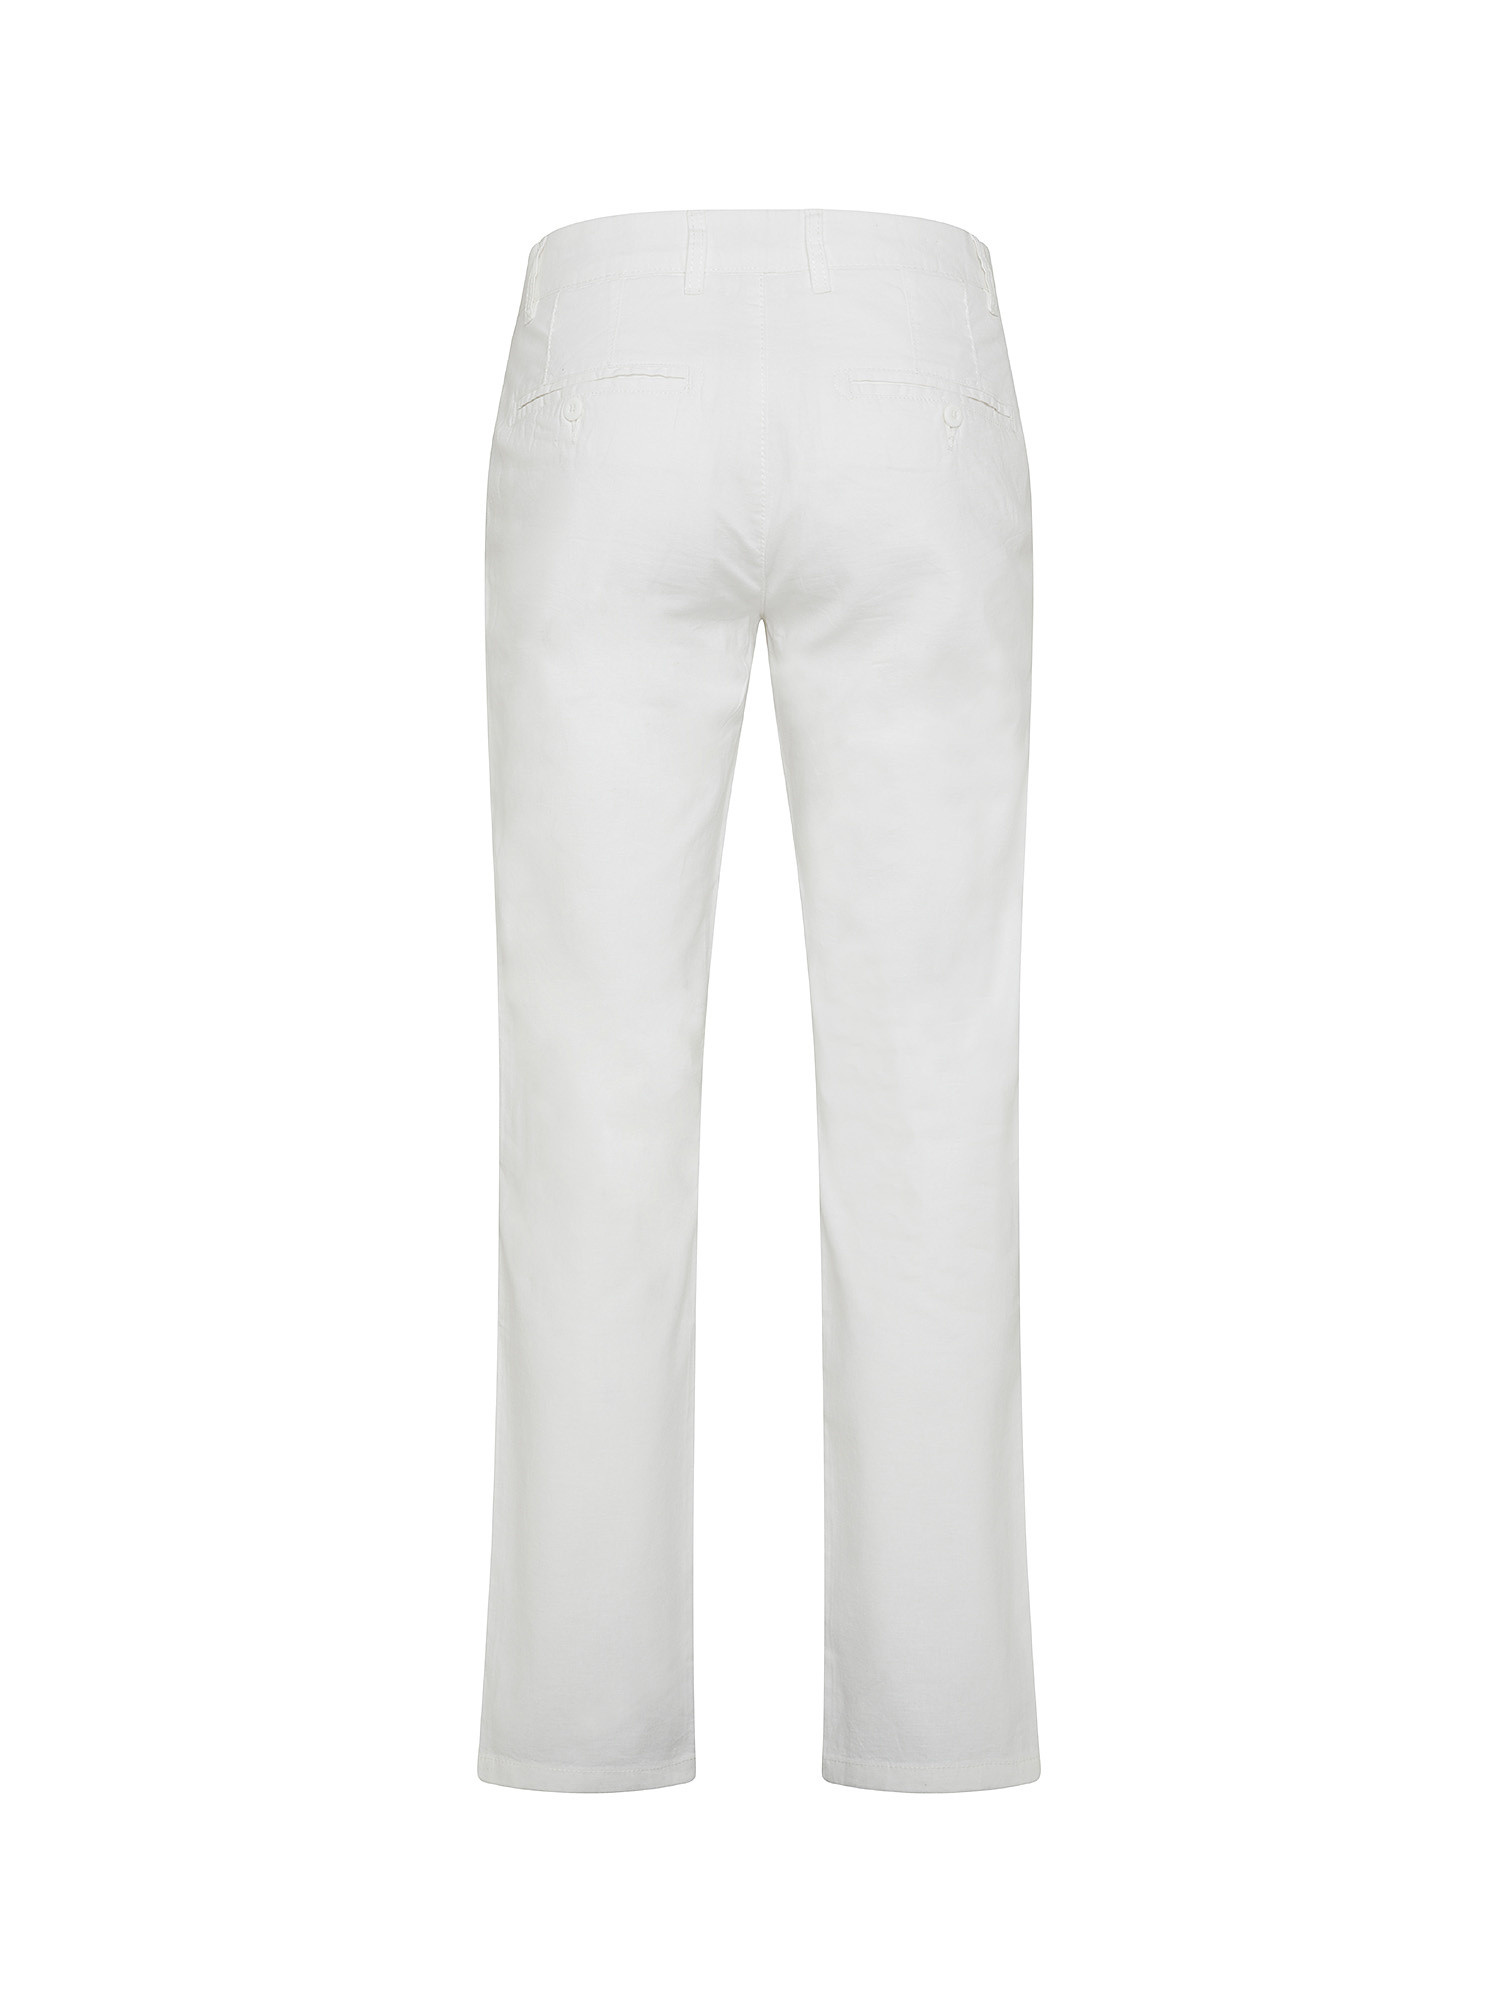 JCT - Linen blend chinos, White, large image number 1